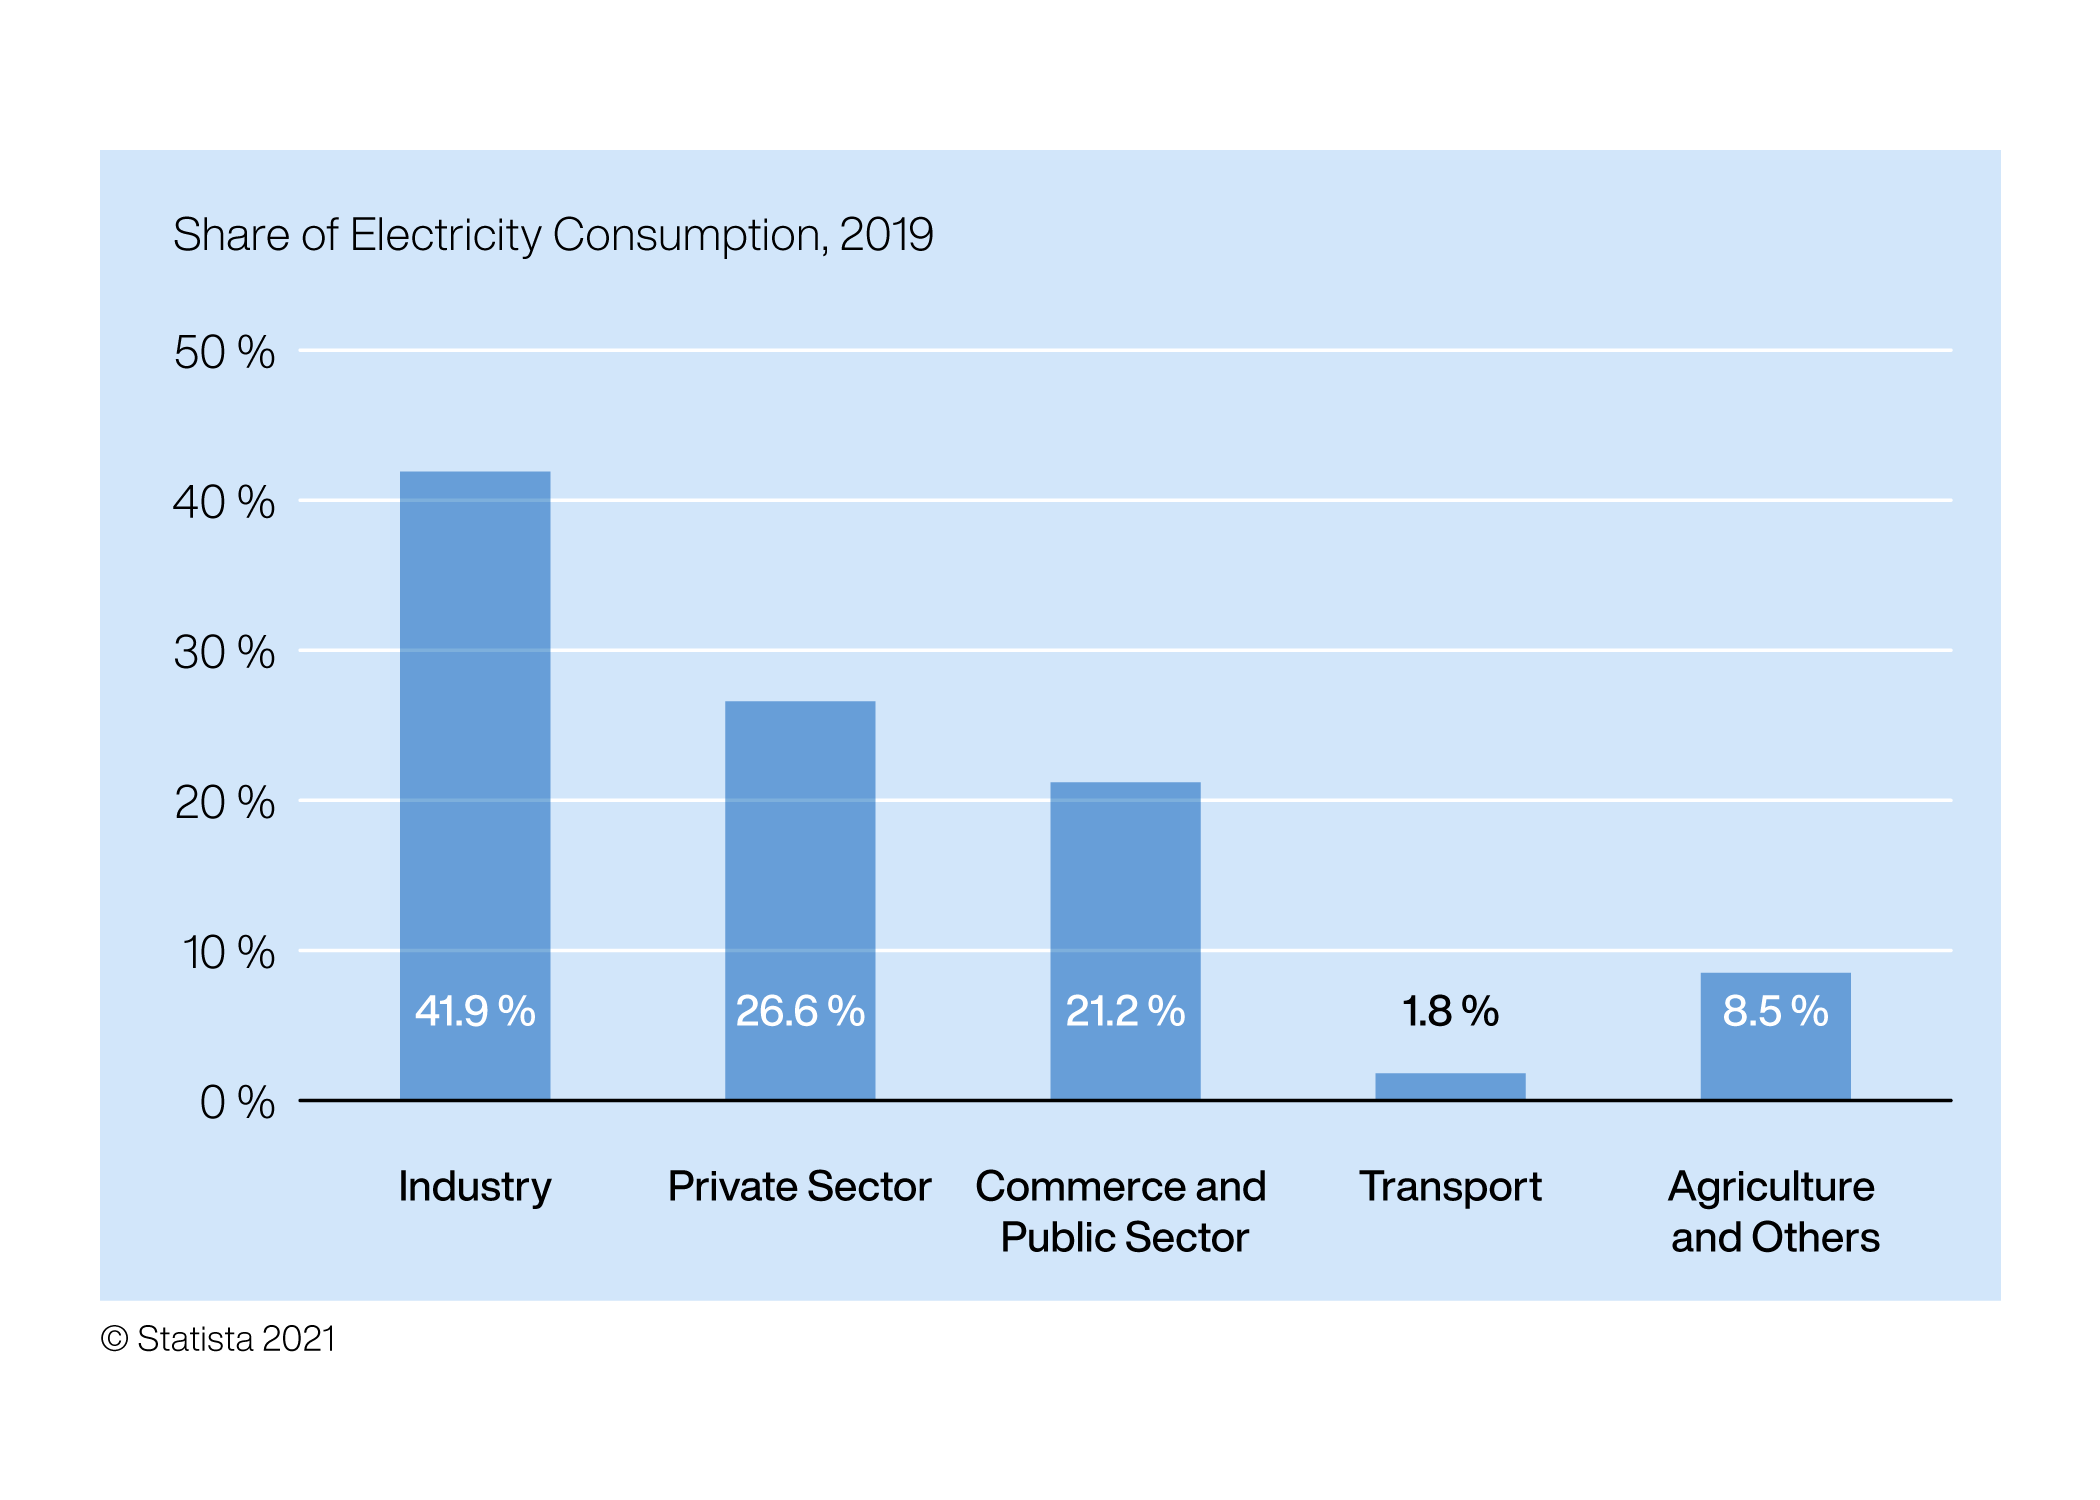 Electricity consumption worldwide by sectors, source: Statista 2021